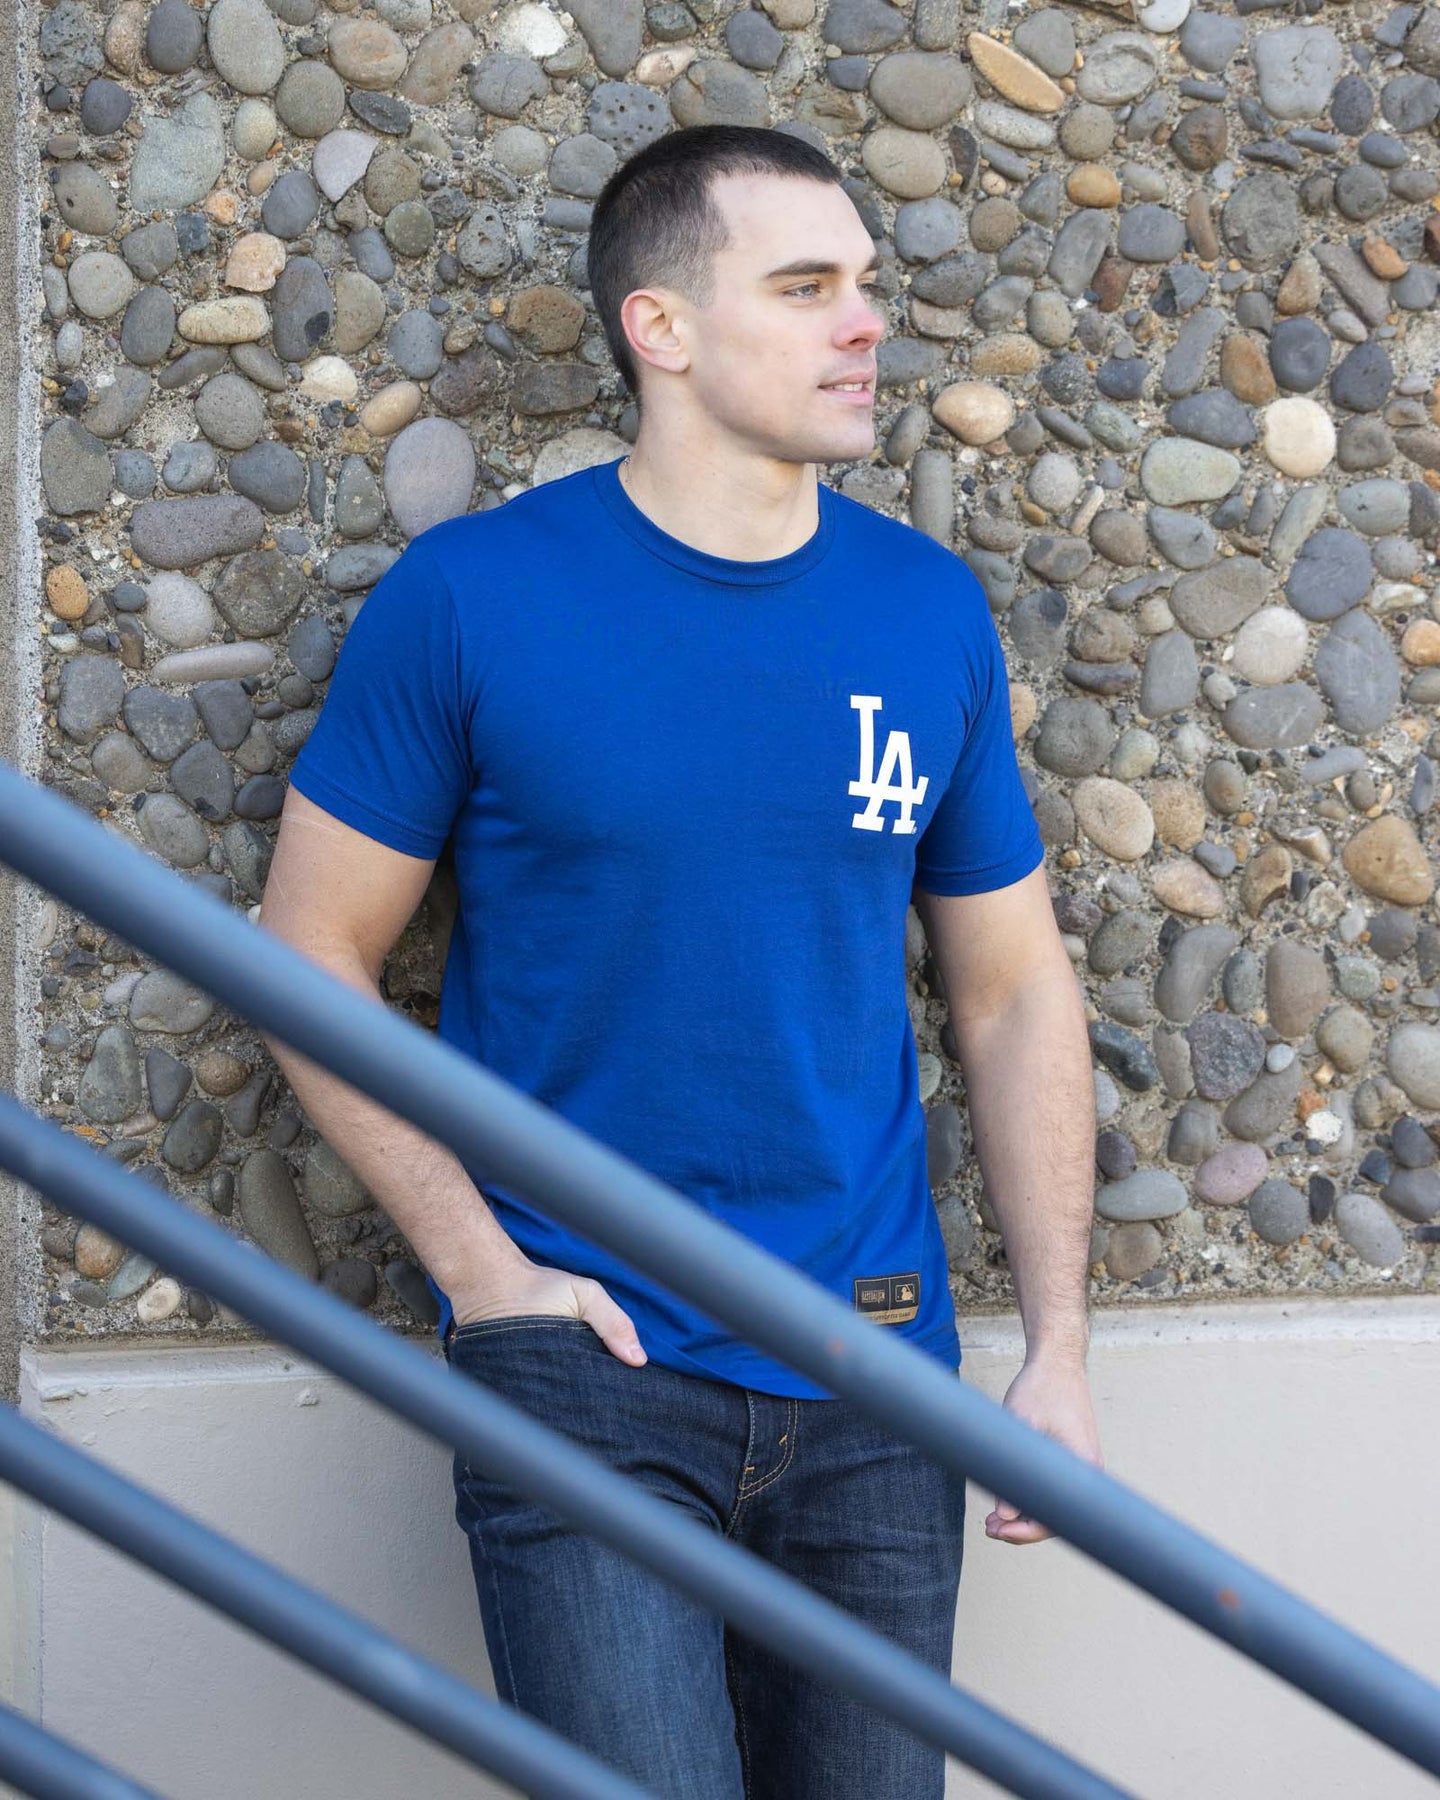 los angeles dodgers shirts for sale